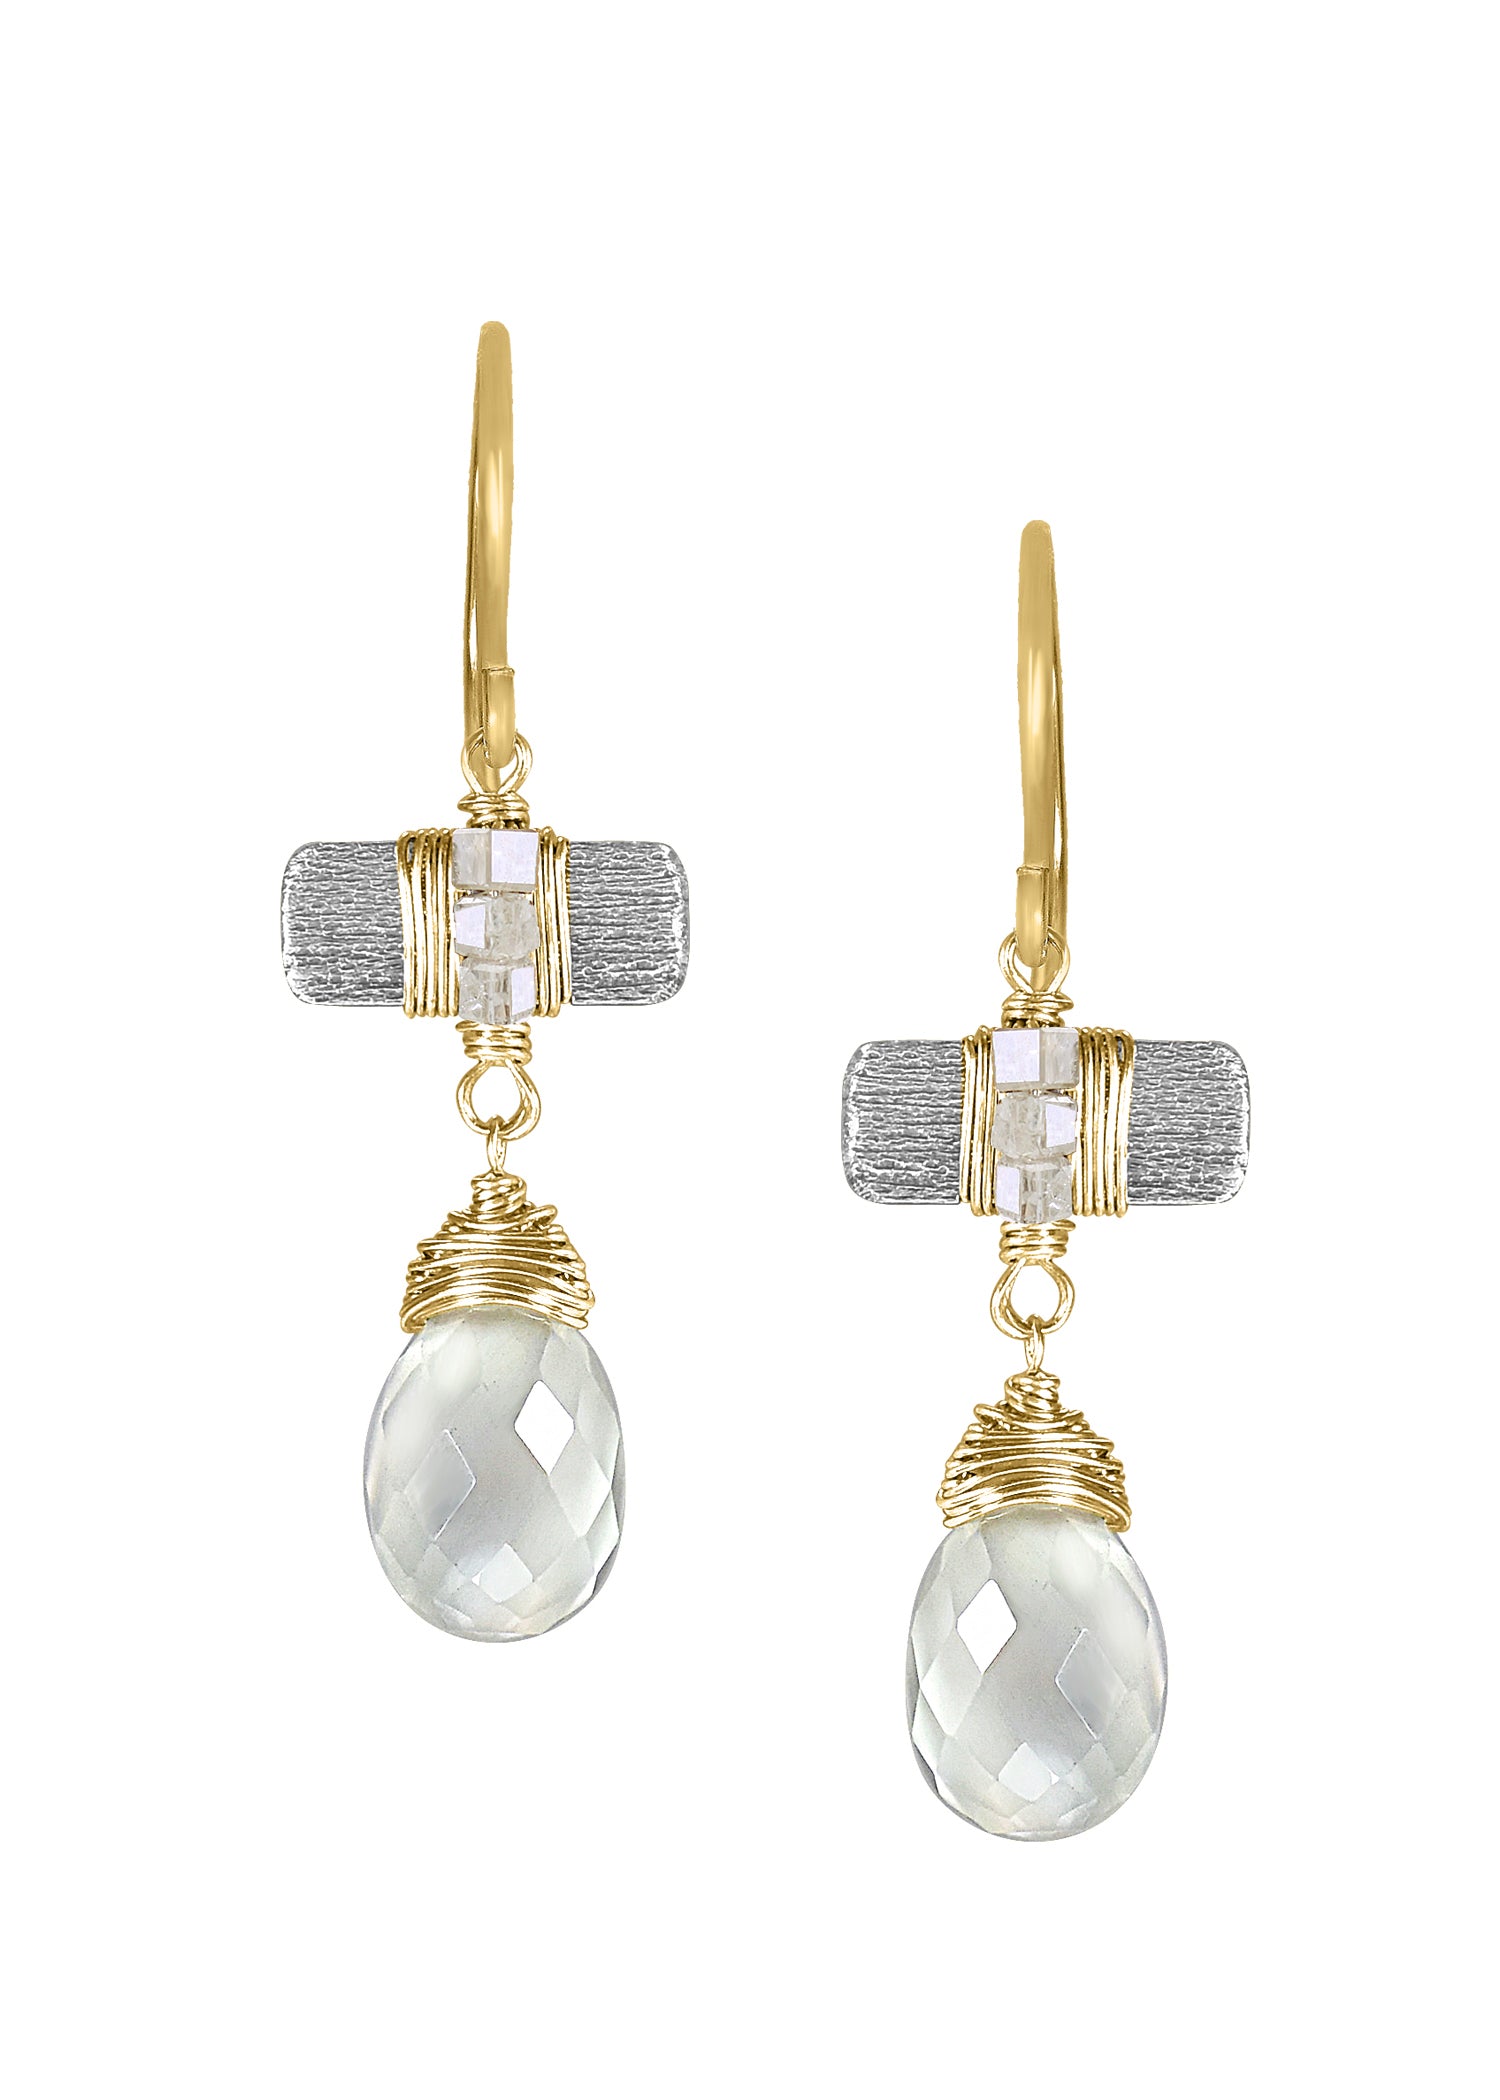 Diamonds Gray moonstone 14k gold Sterling silver Mixed metal Earrings measure 1-1/4" in length (including the ear wires) and 3/8" in width at the widest point Handmade in our Los Angeles studio